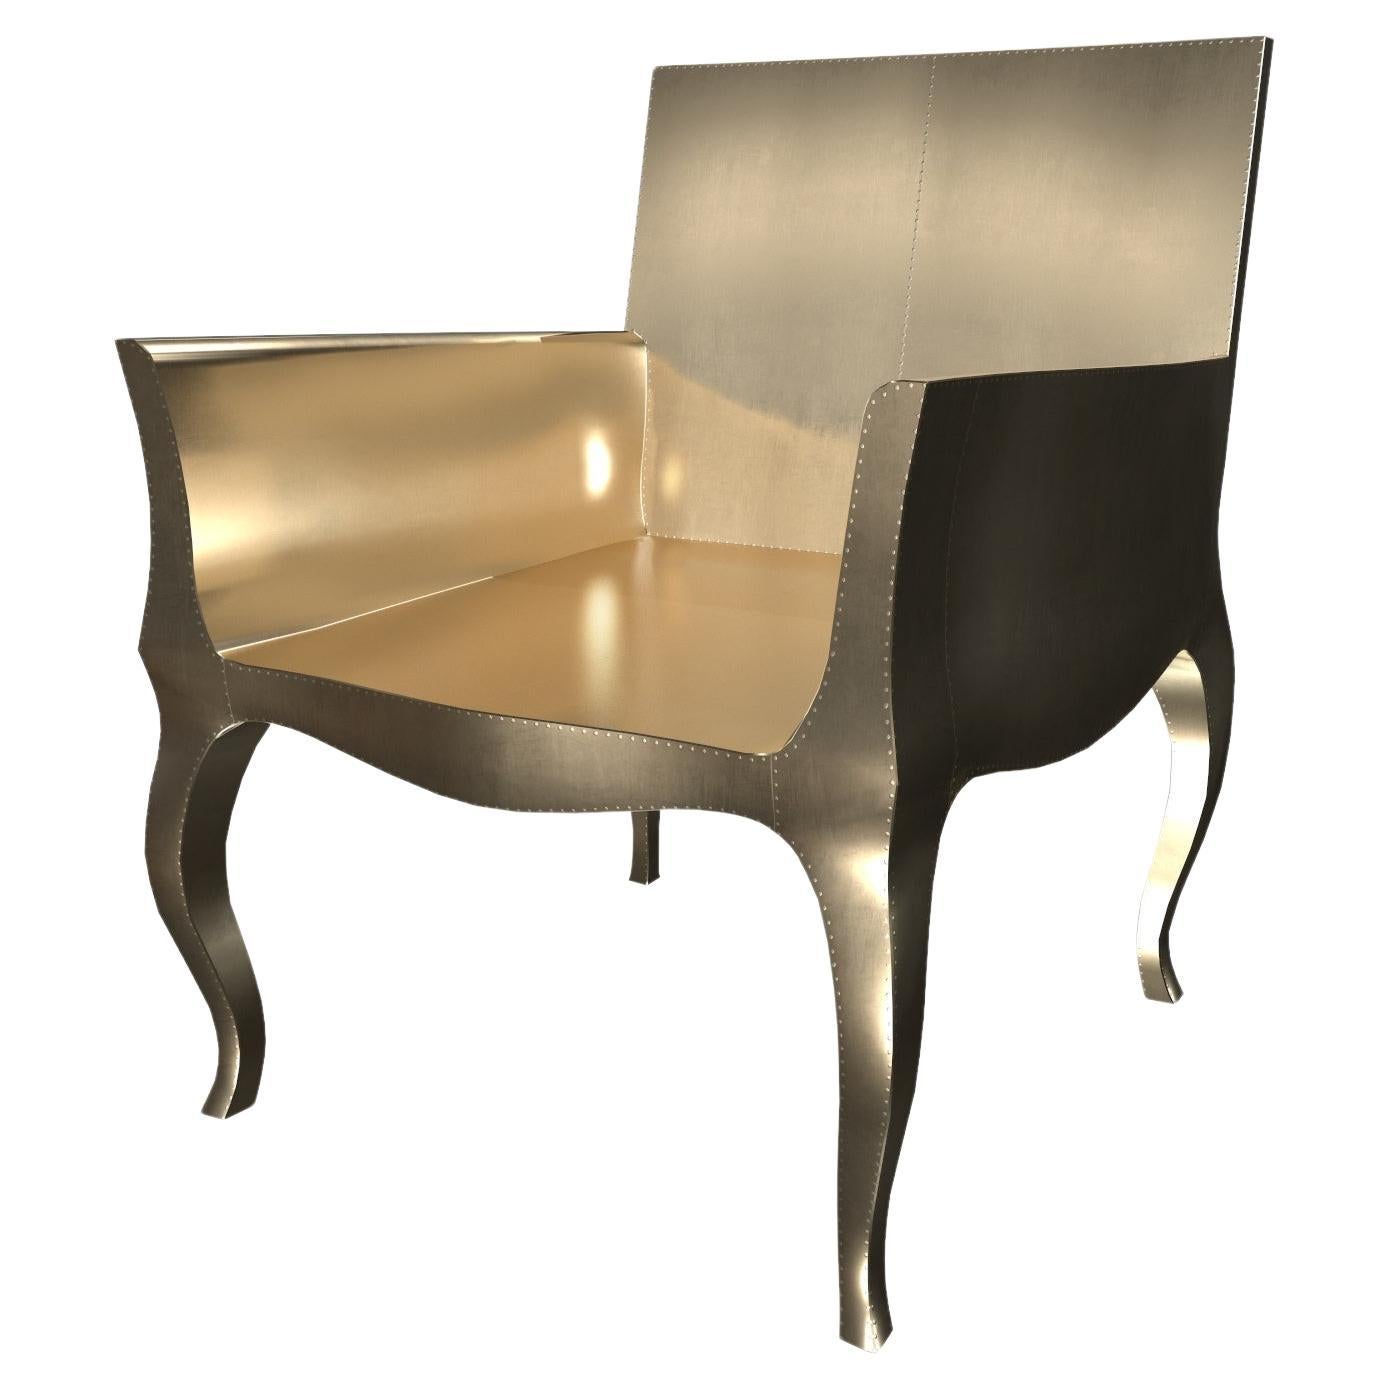 Art Deco Desk Chair in Smooth Brass by Paul Mathieu for S. Odegard